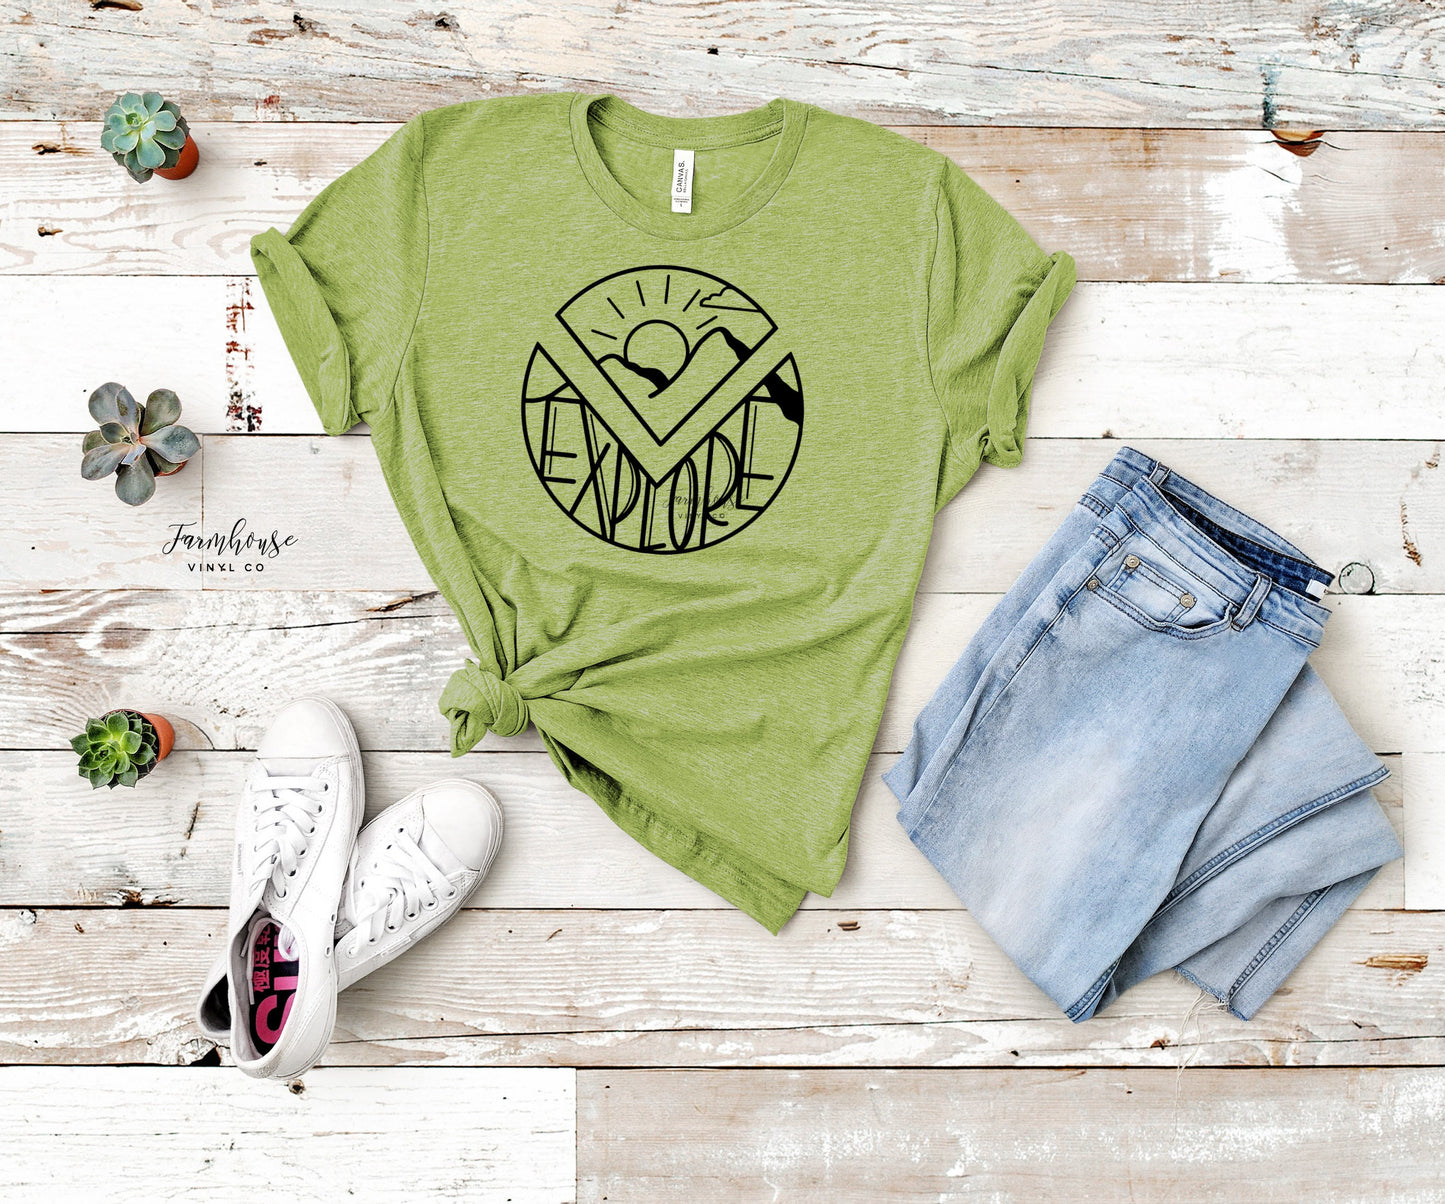 Adventure Awaits T shirt / The Great Outdoors Shirt / Wanderlust Explore More Tee / Unisex Mother's Day Gift Mom Birthday / Youth Adult Kids - Farmhouse Vinyl Co